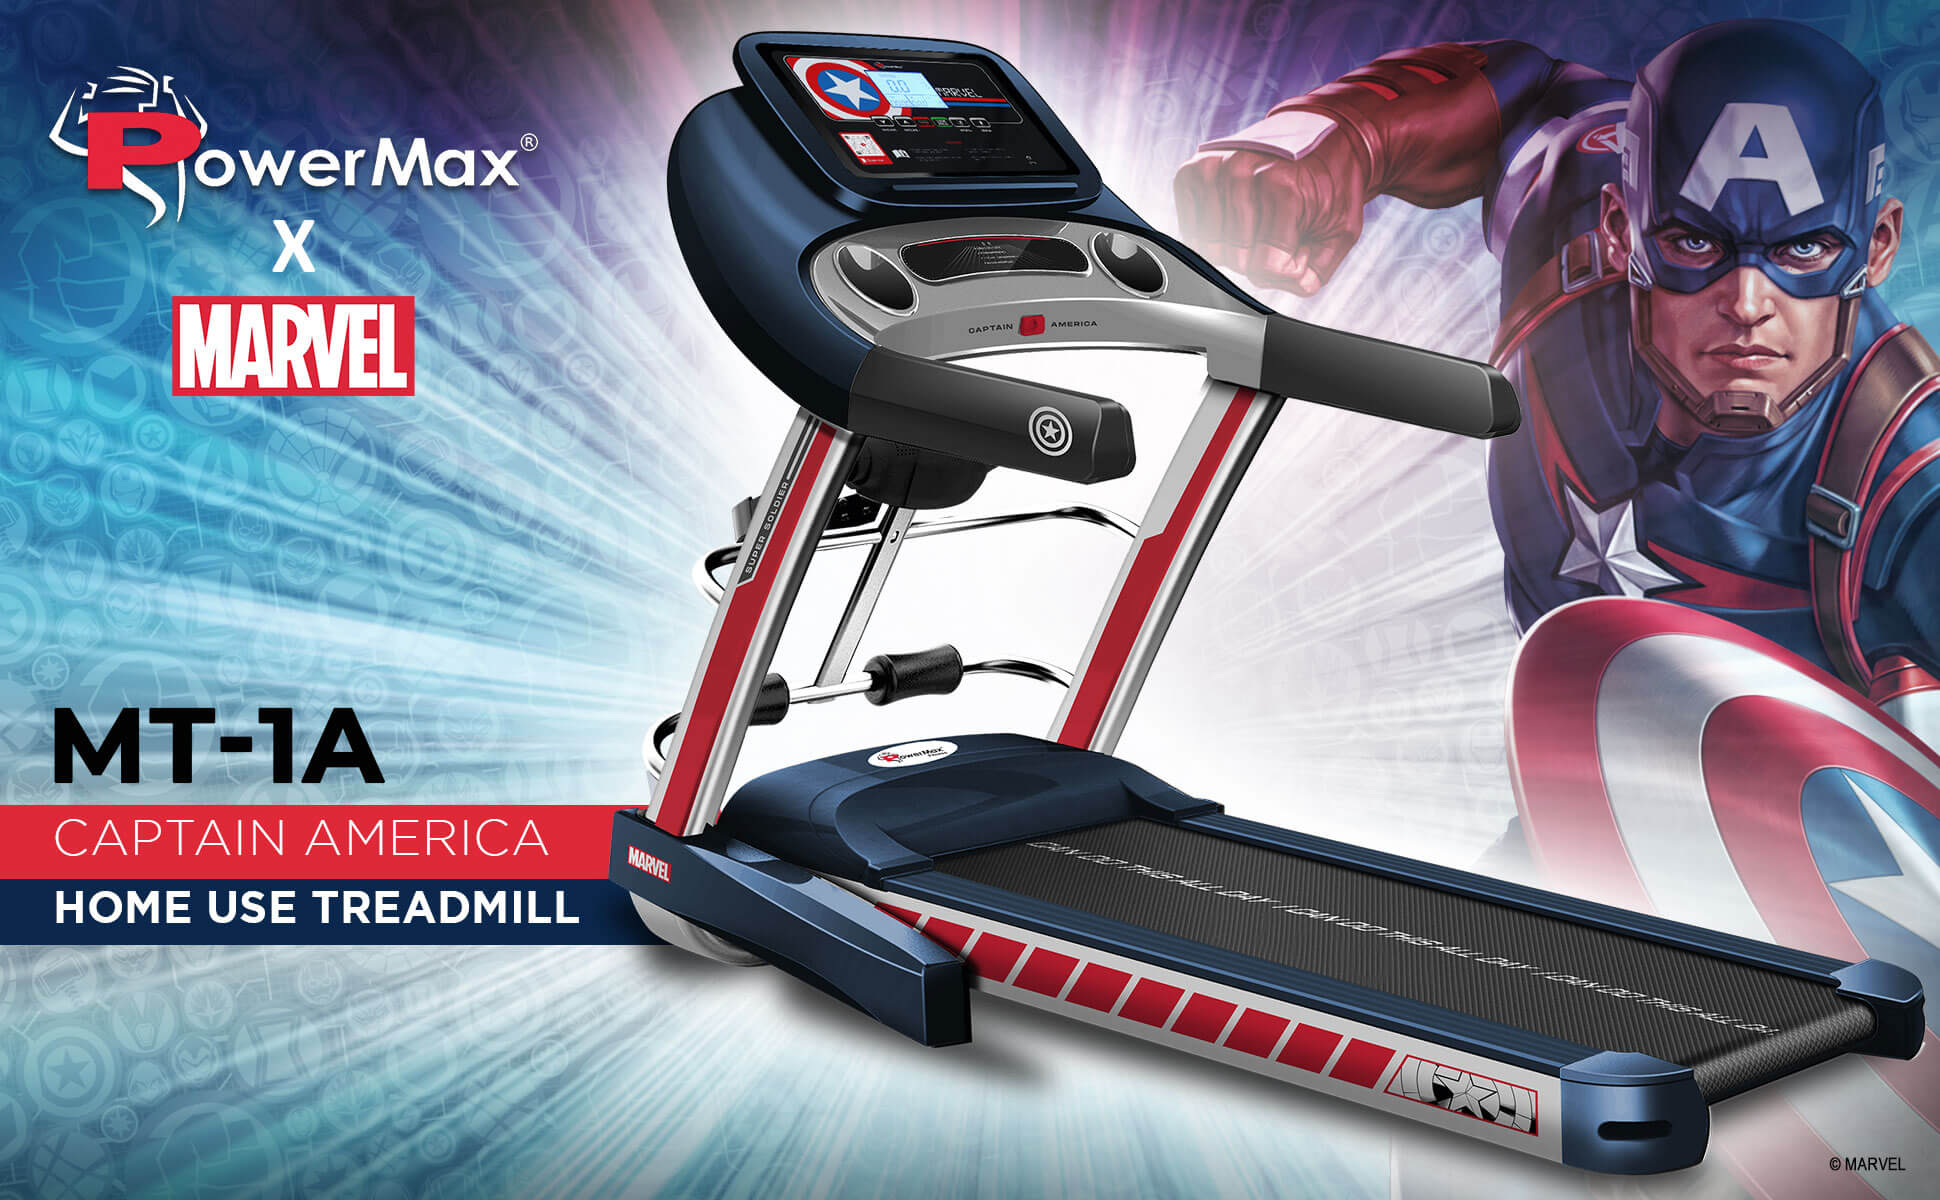 PowerMax X Marvel MT-1A/TD-A1 Motorized Treadmill with Android & iOS  Application